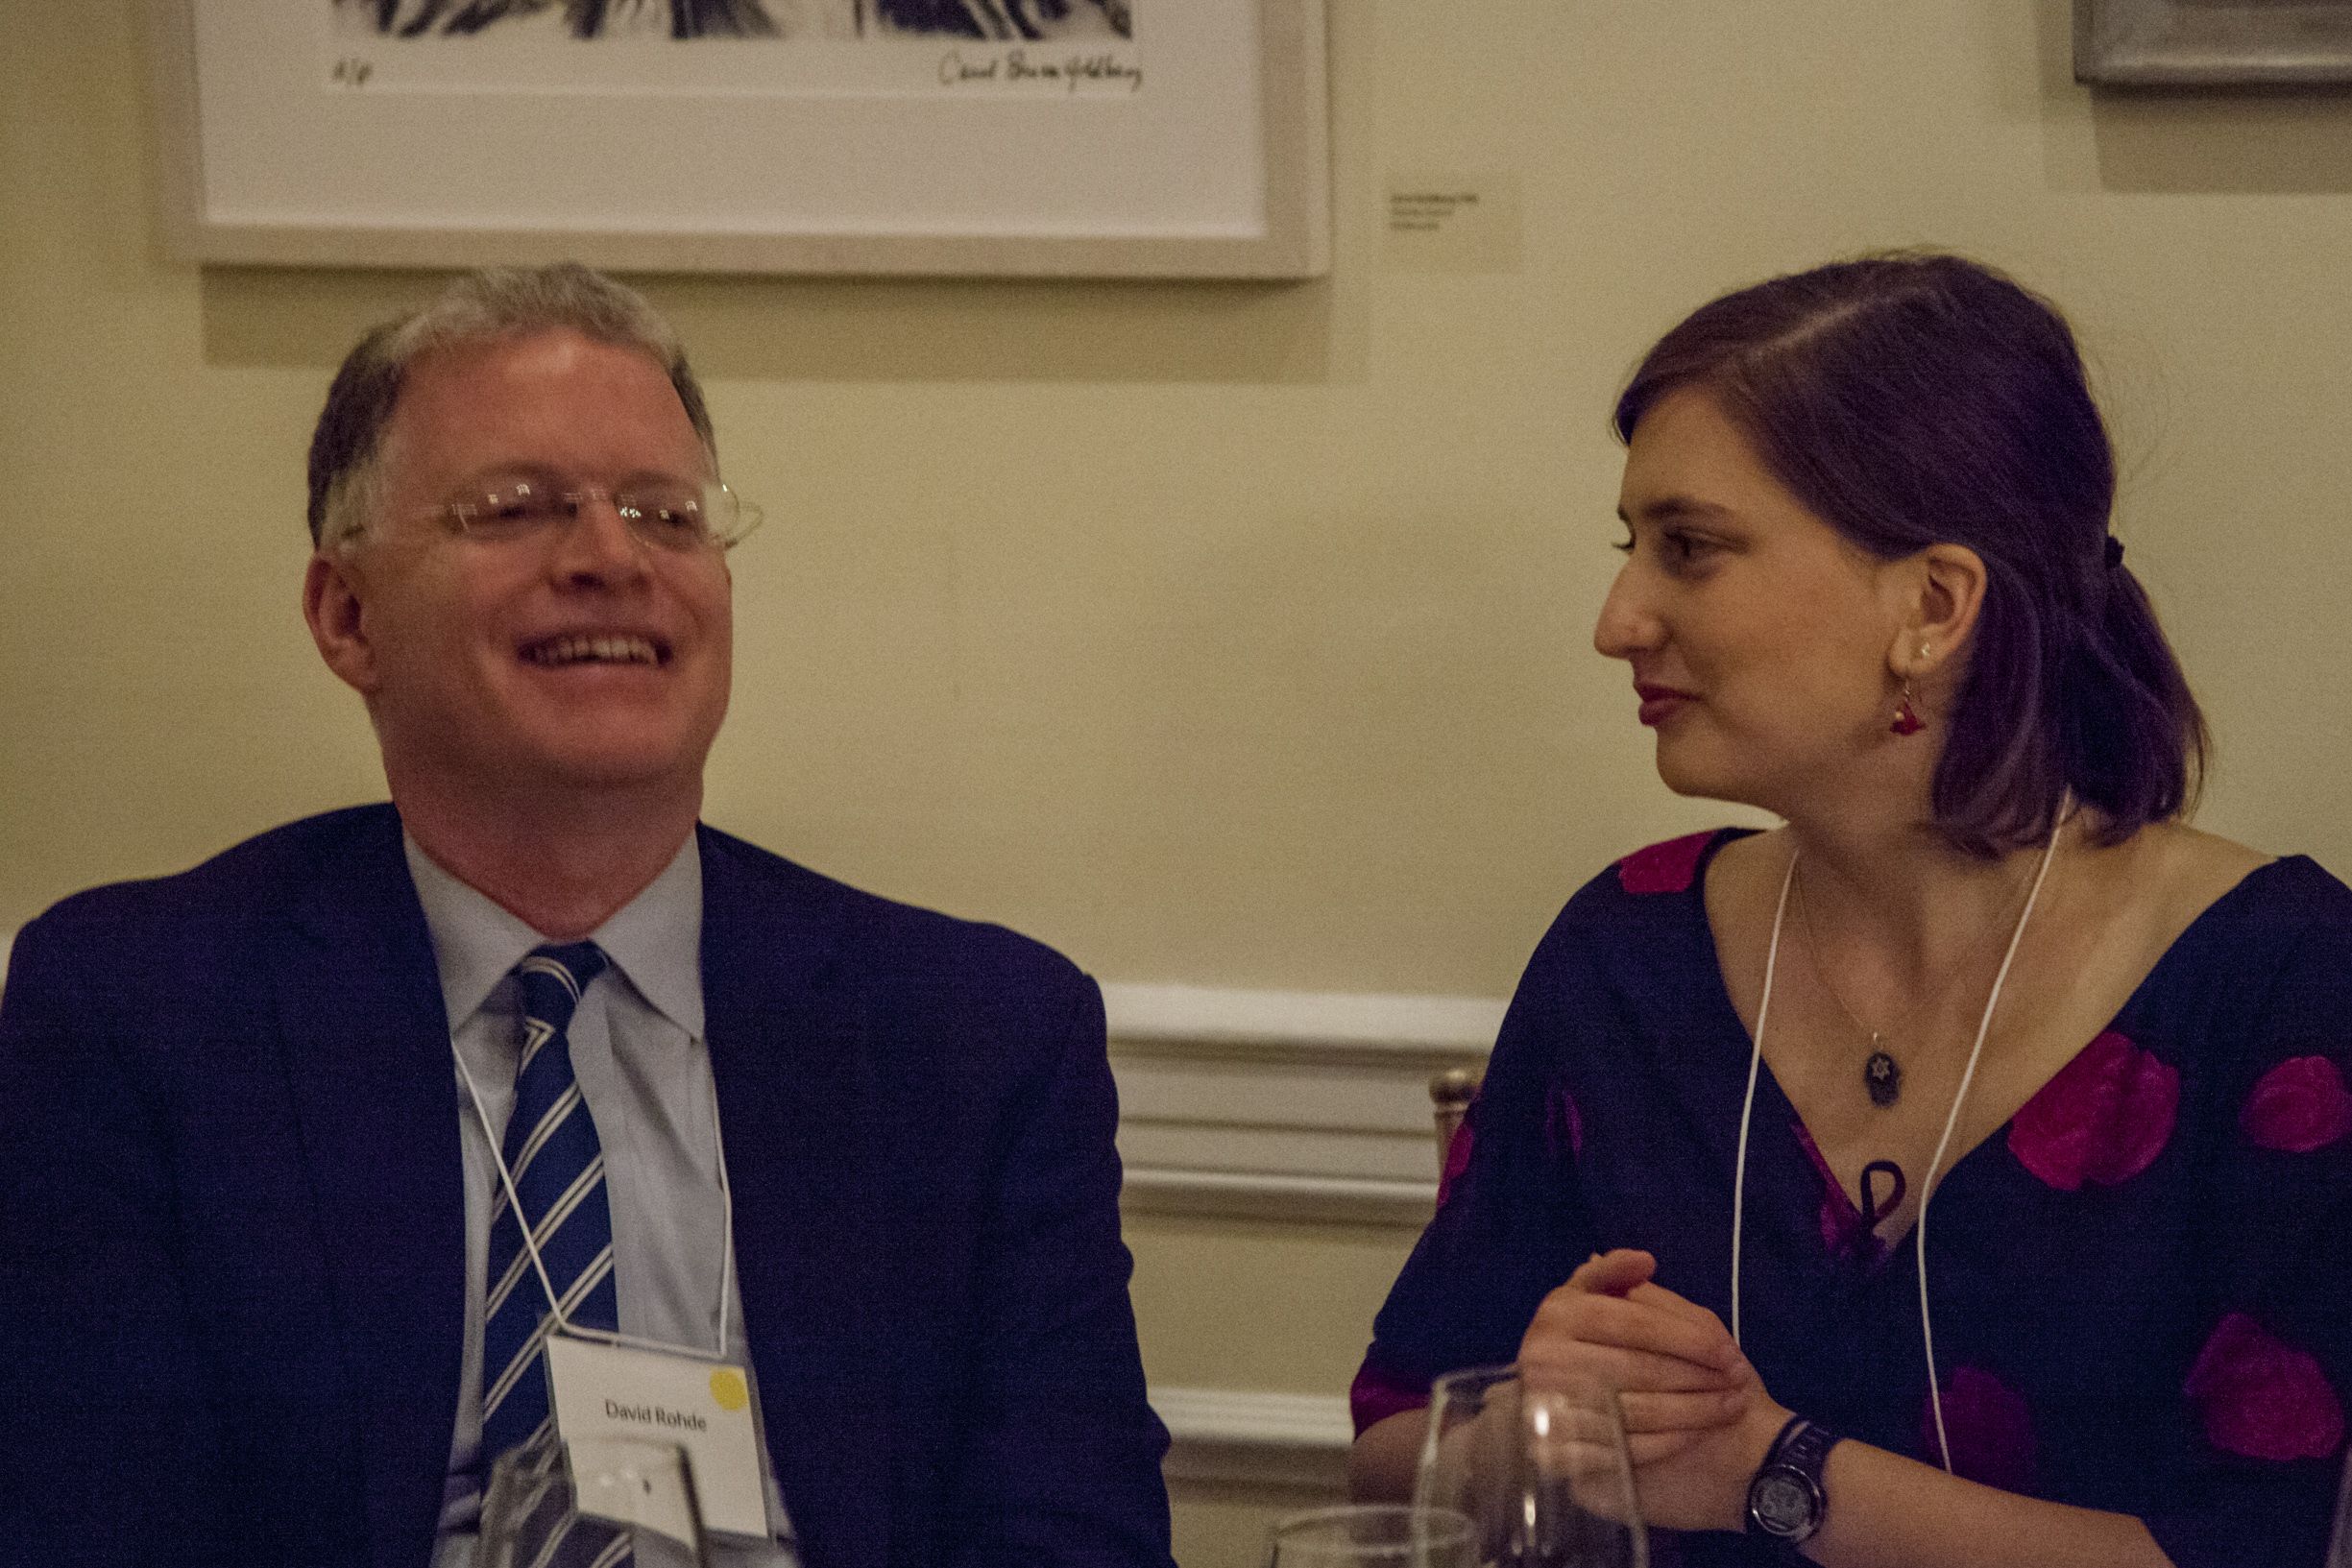 David Rohde of the Board of Directors talking with student fellow Julia Friedmann. Image by Jin Ding. United States, 2018.